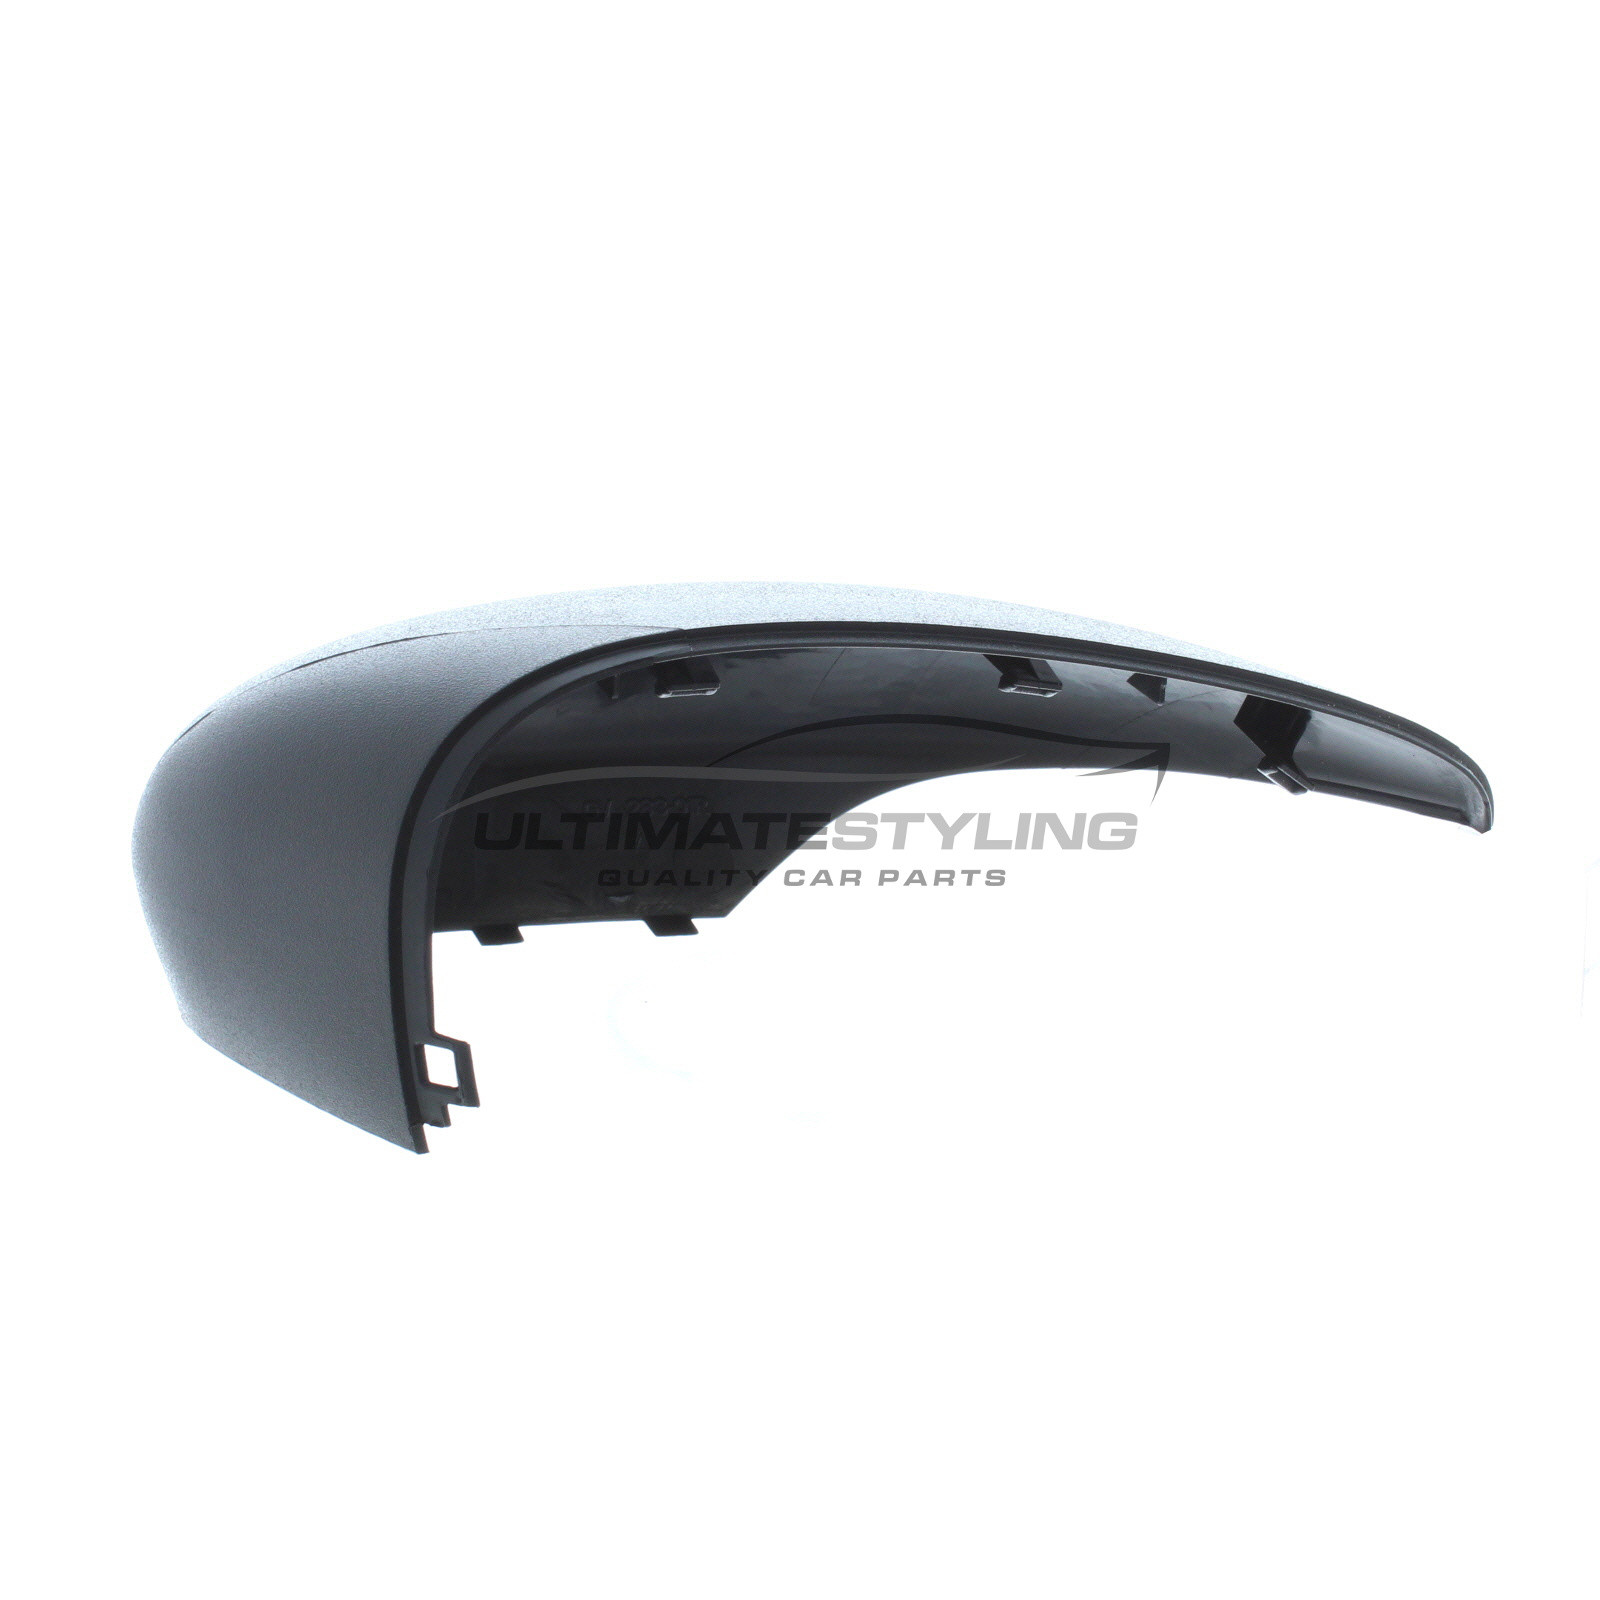 Blue Door Wing Mirror Cover for Ford Fiesta MK7 09-18 Left+Right Side 